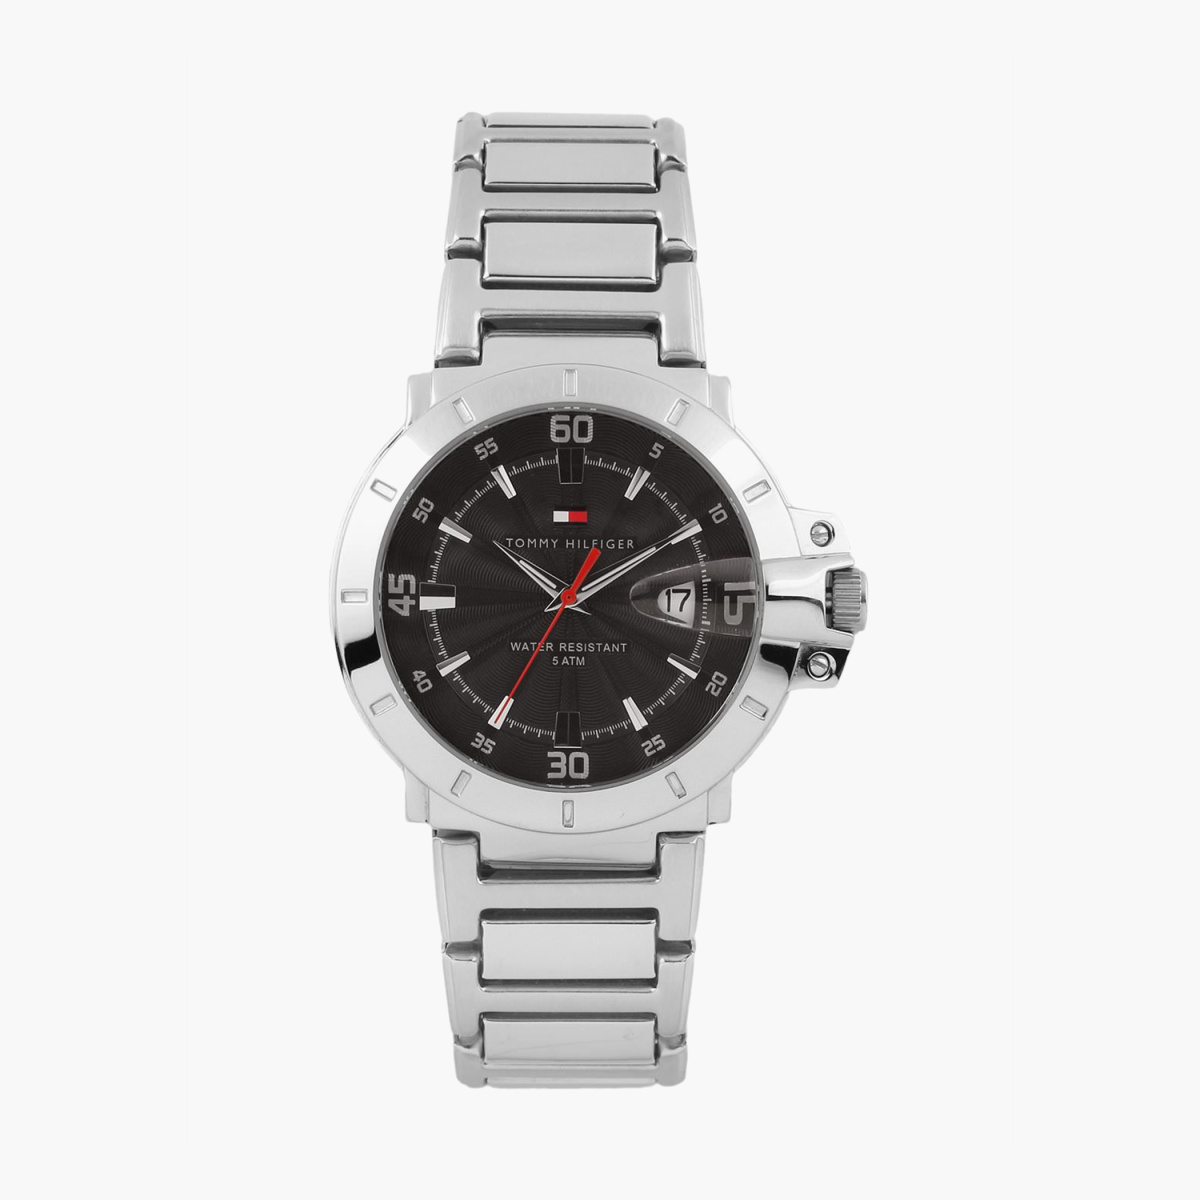 TOMMY HILFIGER Men Water-Resistant Analog Watch - NBTH1790469